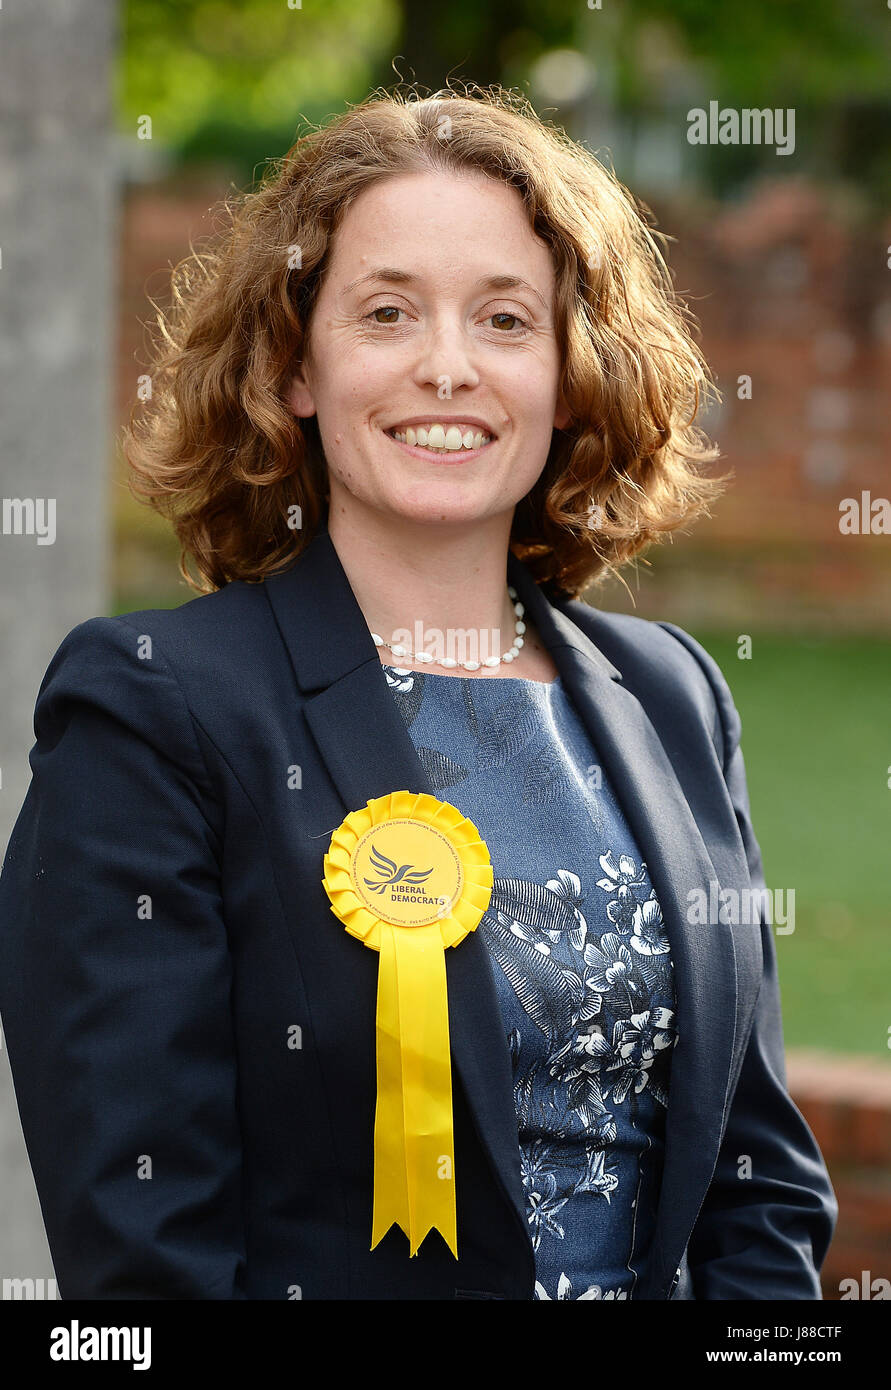 Rosina Robson the Liberal Democrat candidate standing in the Uxbridge and South Ruislip constituency, arrives to take part in an election hustings at the Yiewsley Baptist Church, in, Yiewsley, Middlesex. Stock Photo